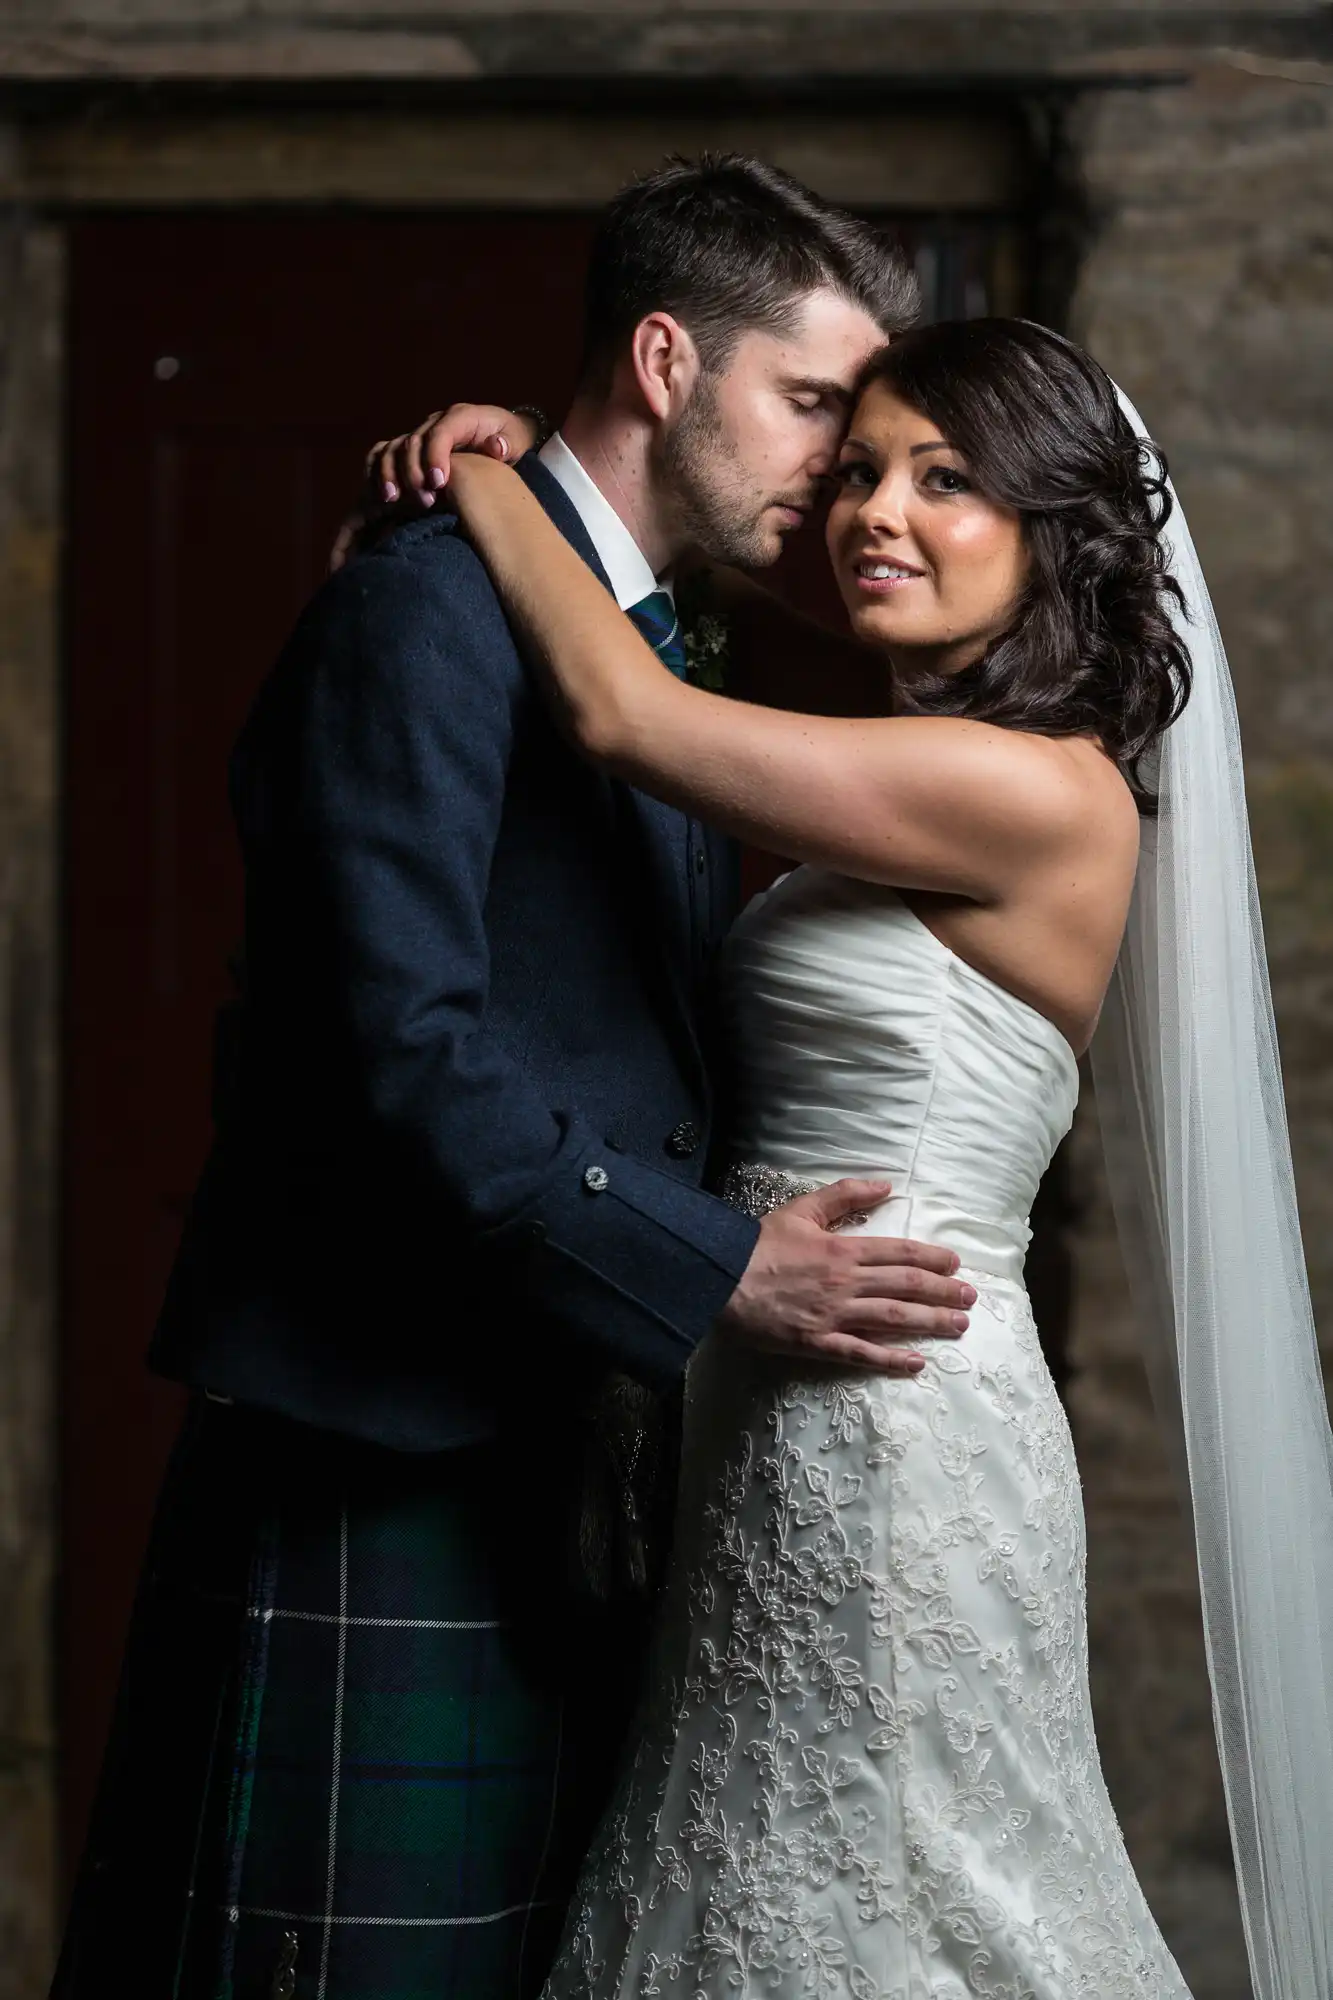 A bride and groom embrace tenderly, the groom in a tartan kilt and the bride in a strapless lace gown, with a soft focus on a rustic door background.